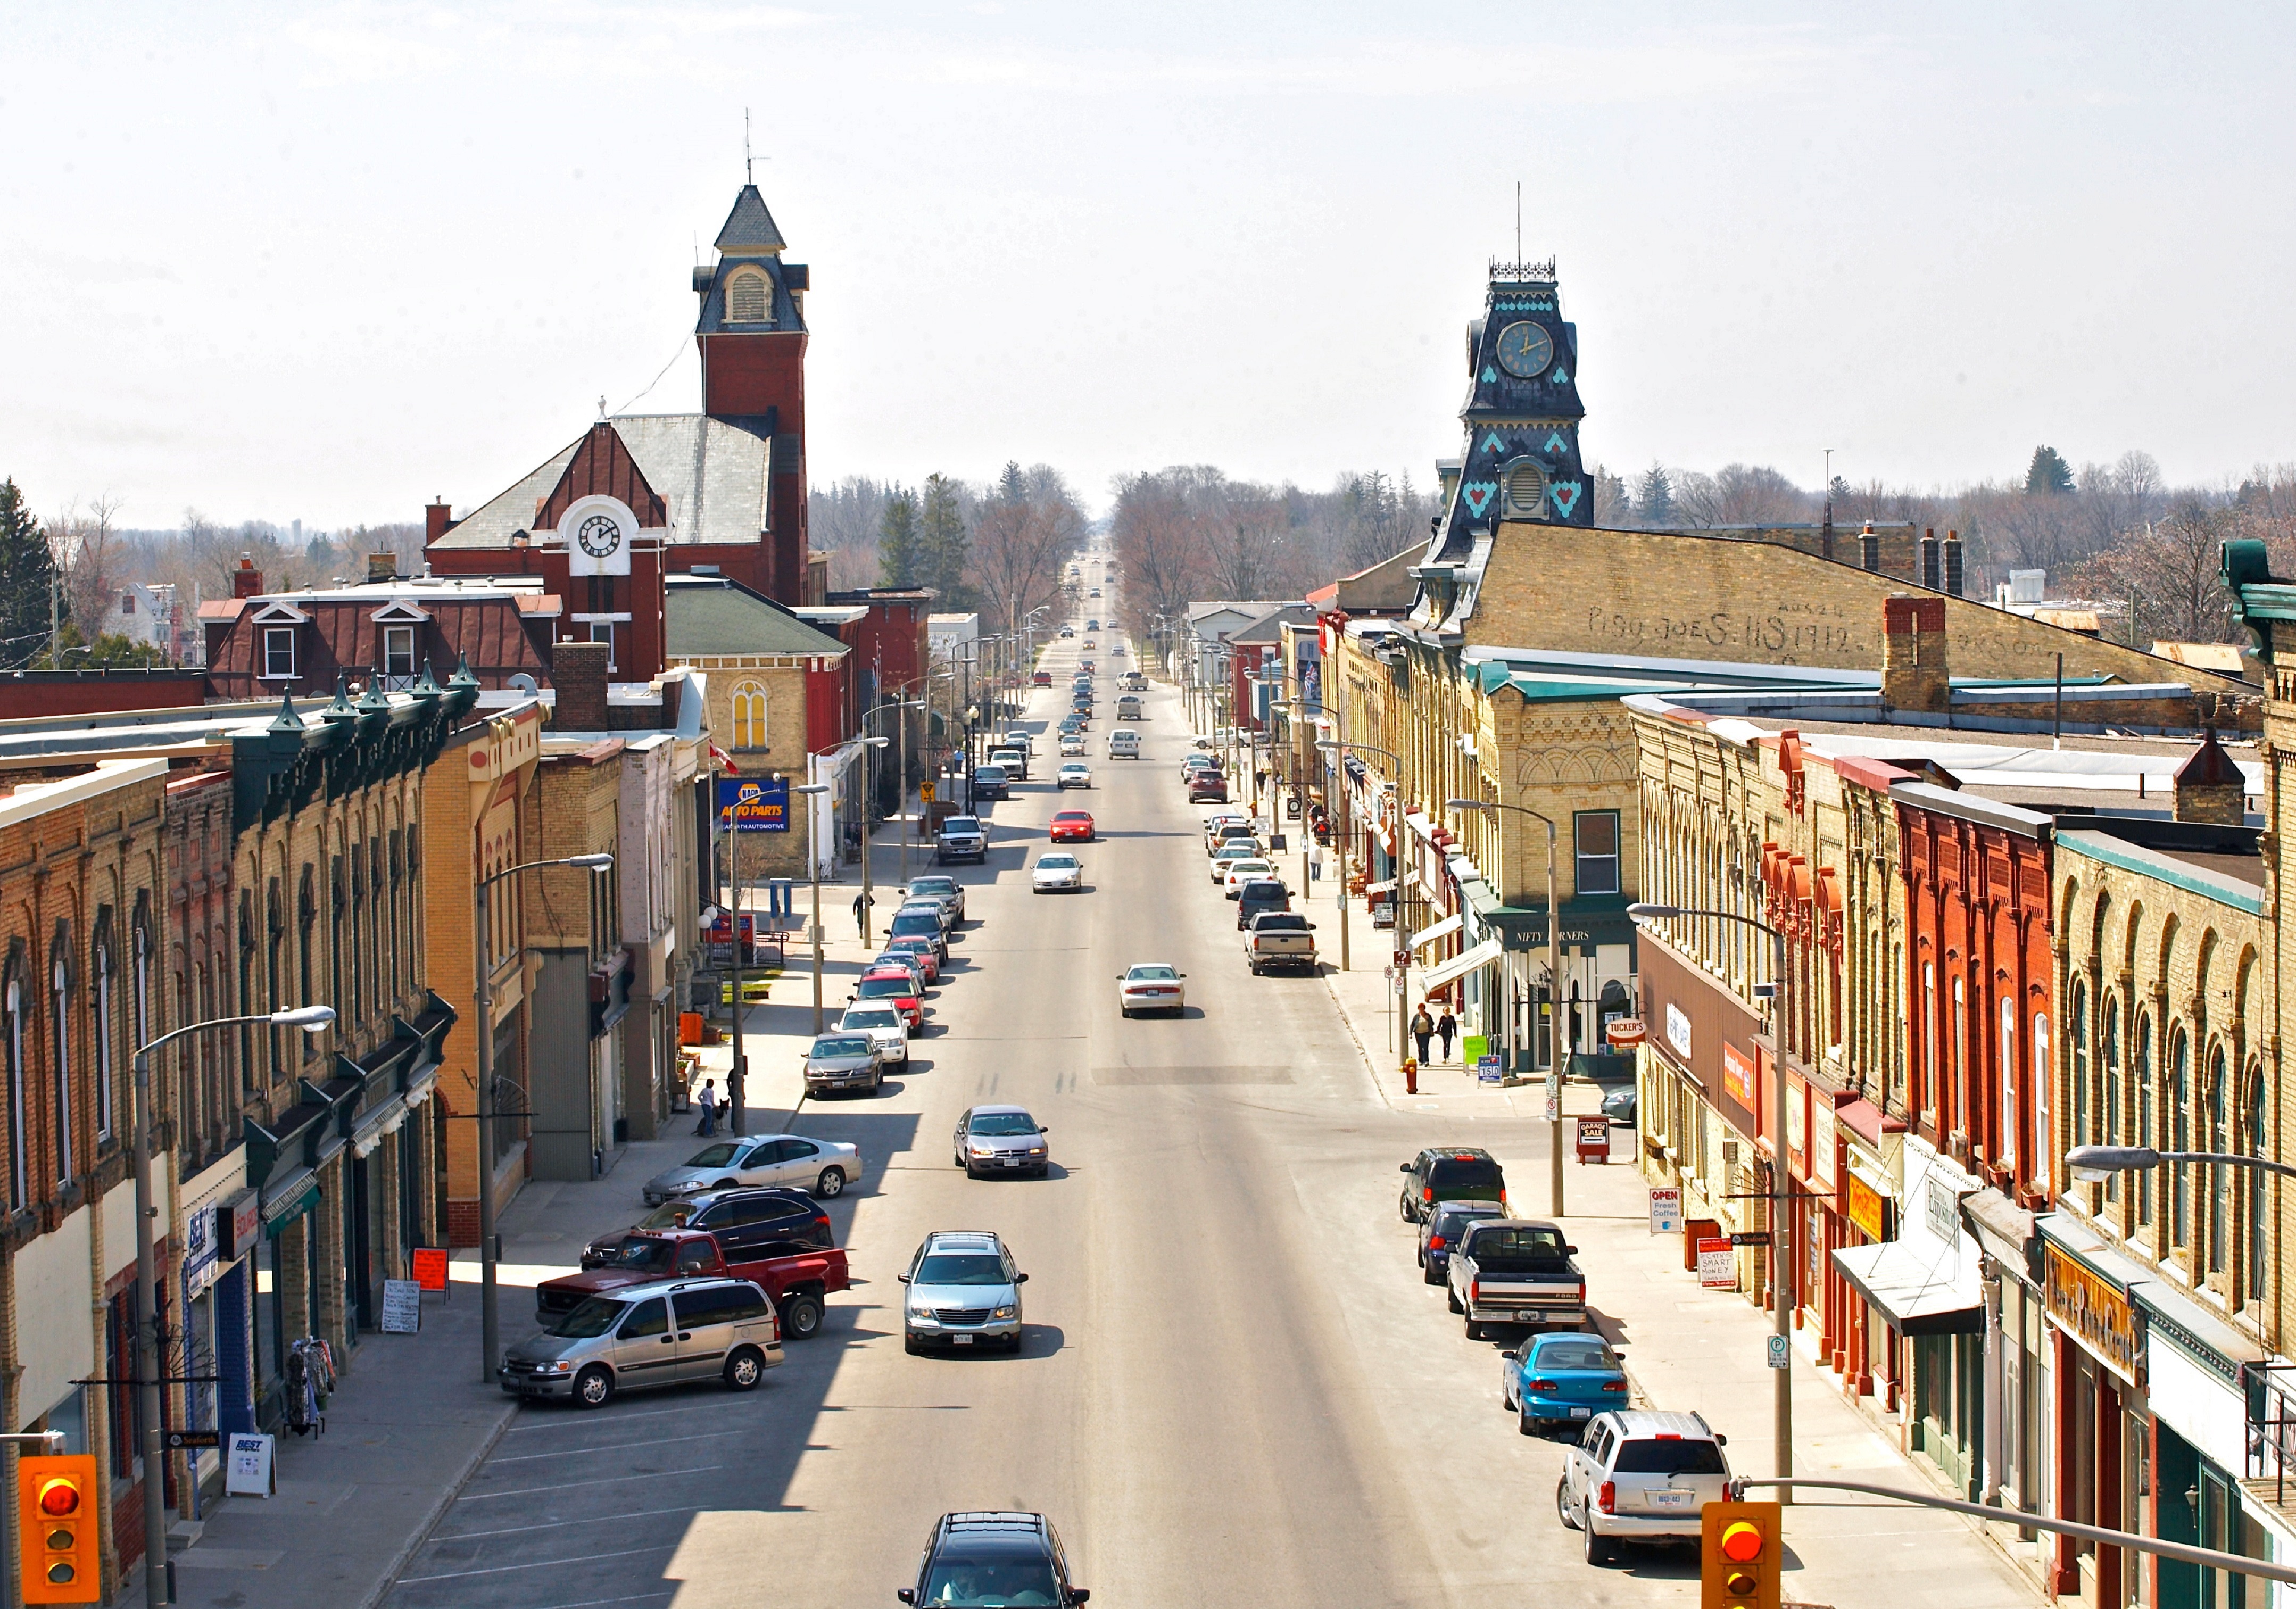 A drone image of downtown Seaforth showing the historic buildings along Main Street S.